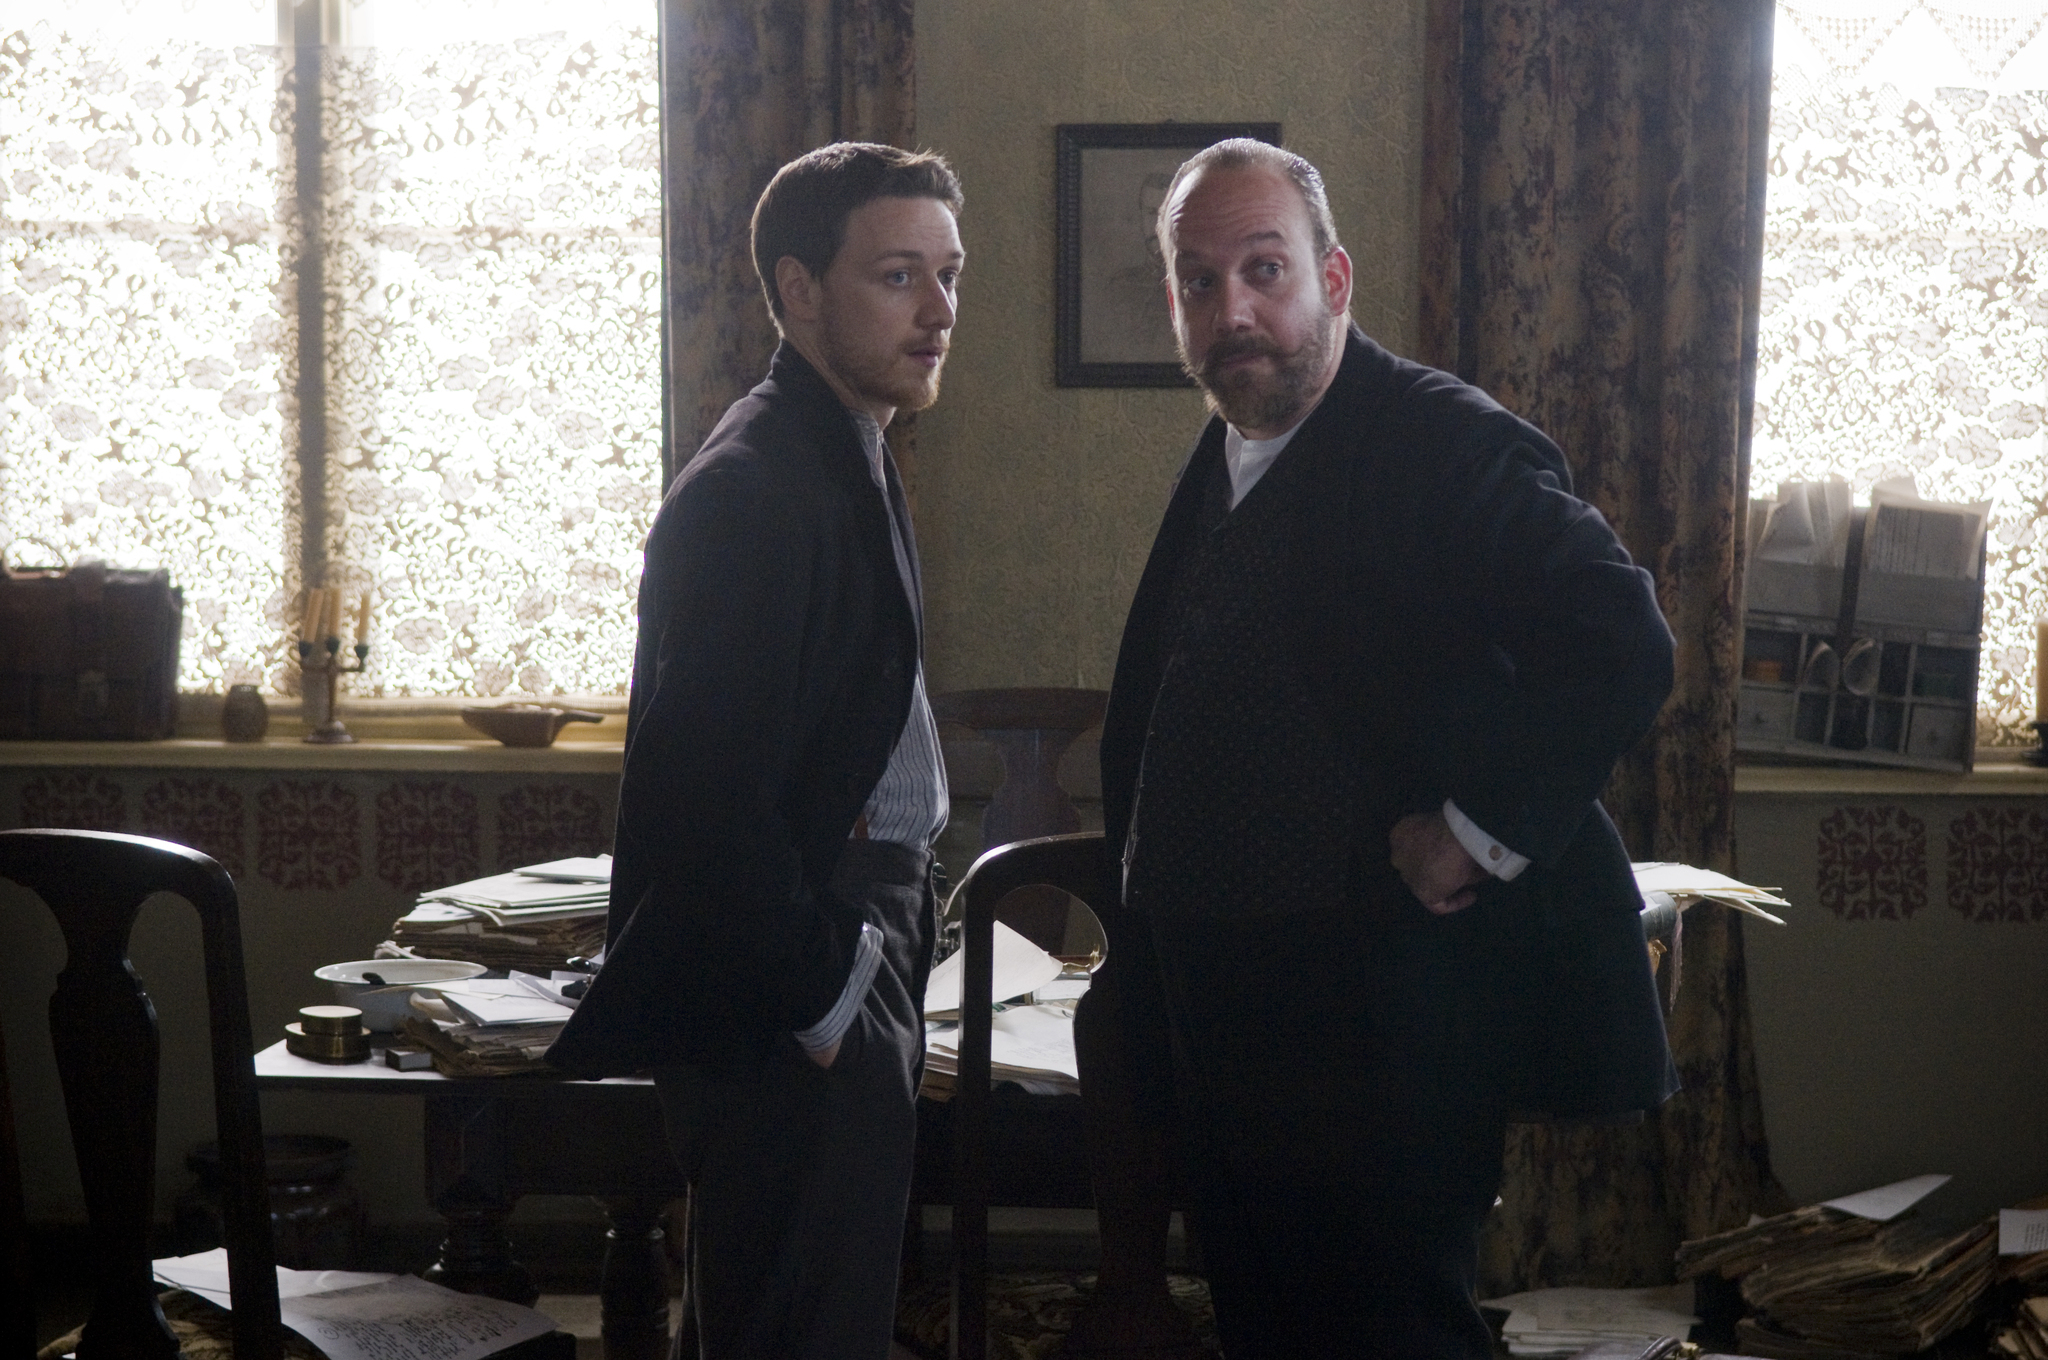 Still of Paul Giamatti and James McAvoy in The Last Station (2009)